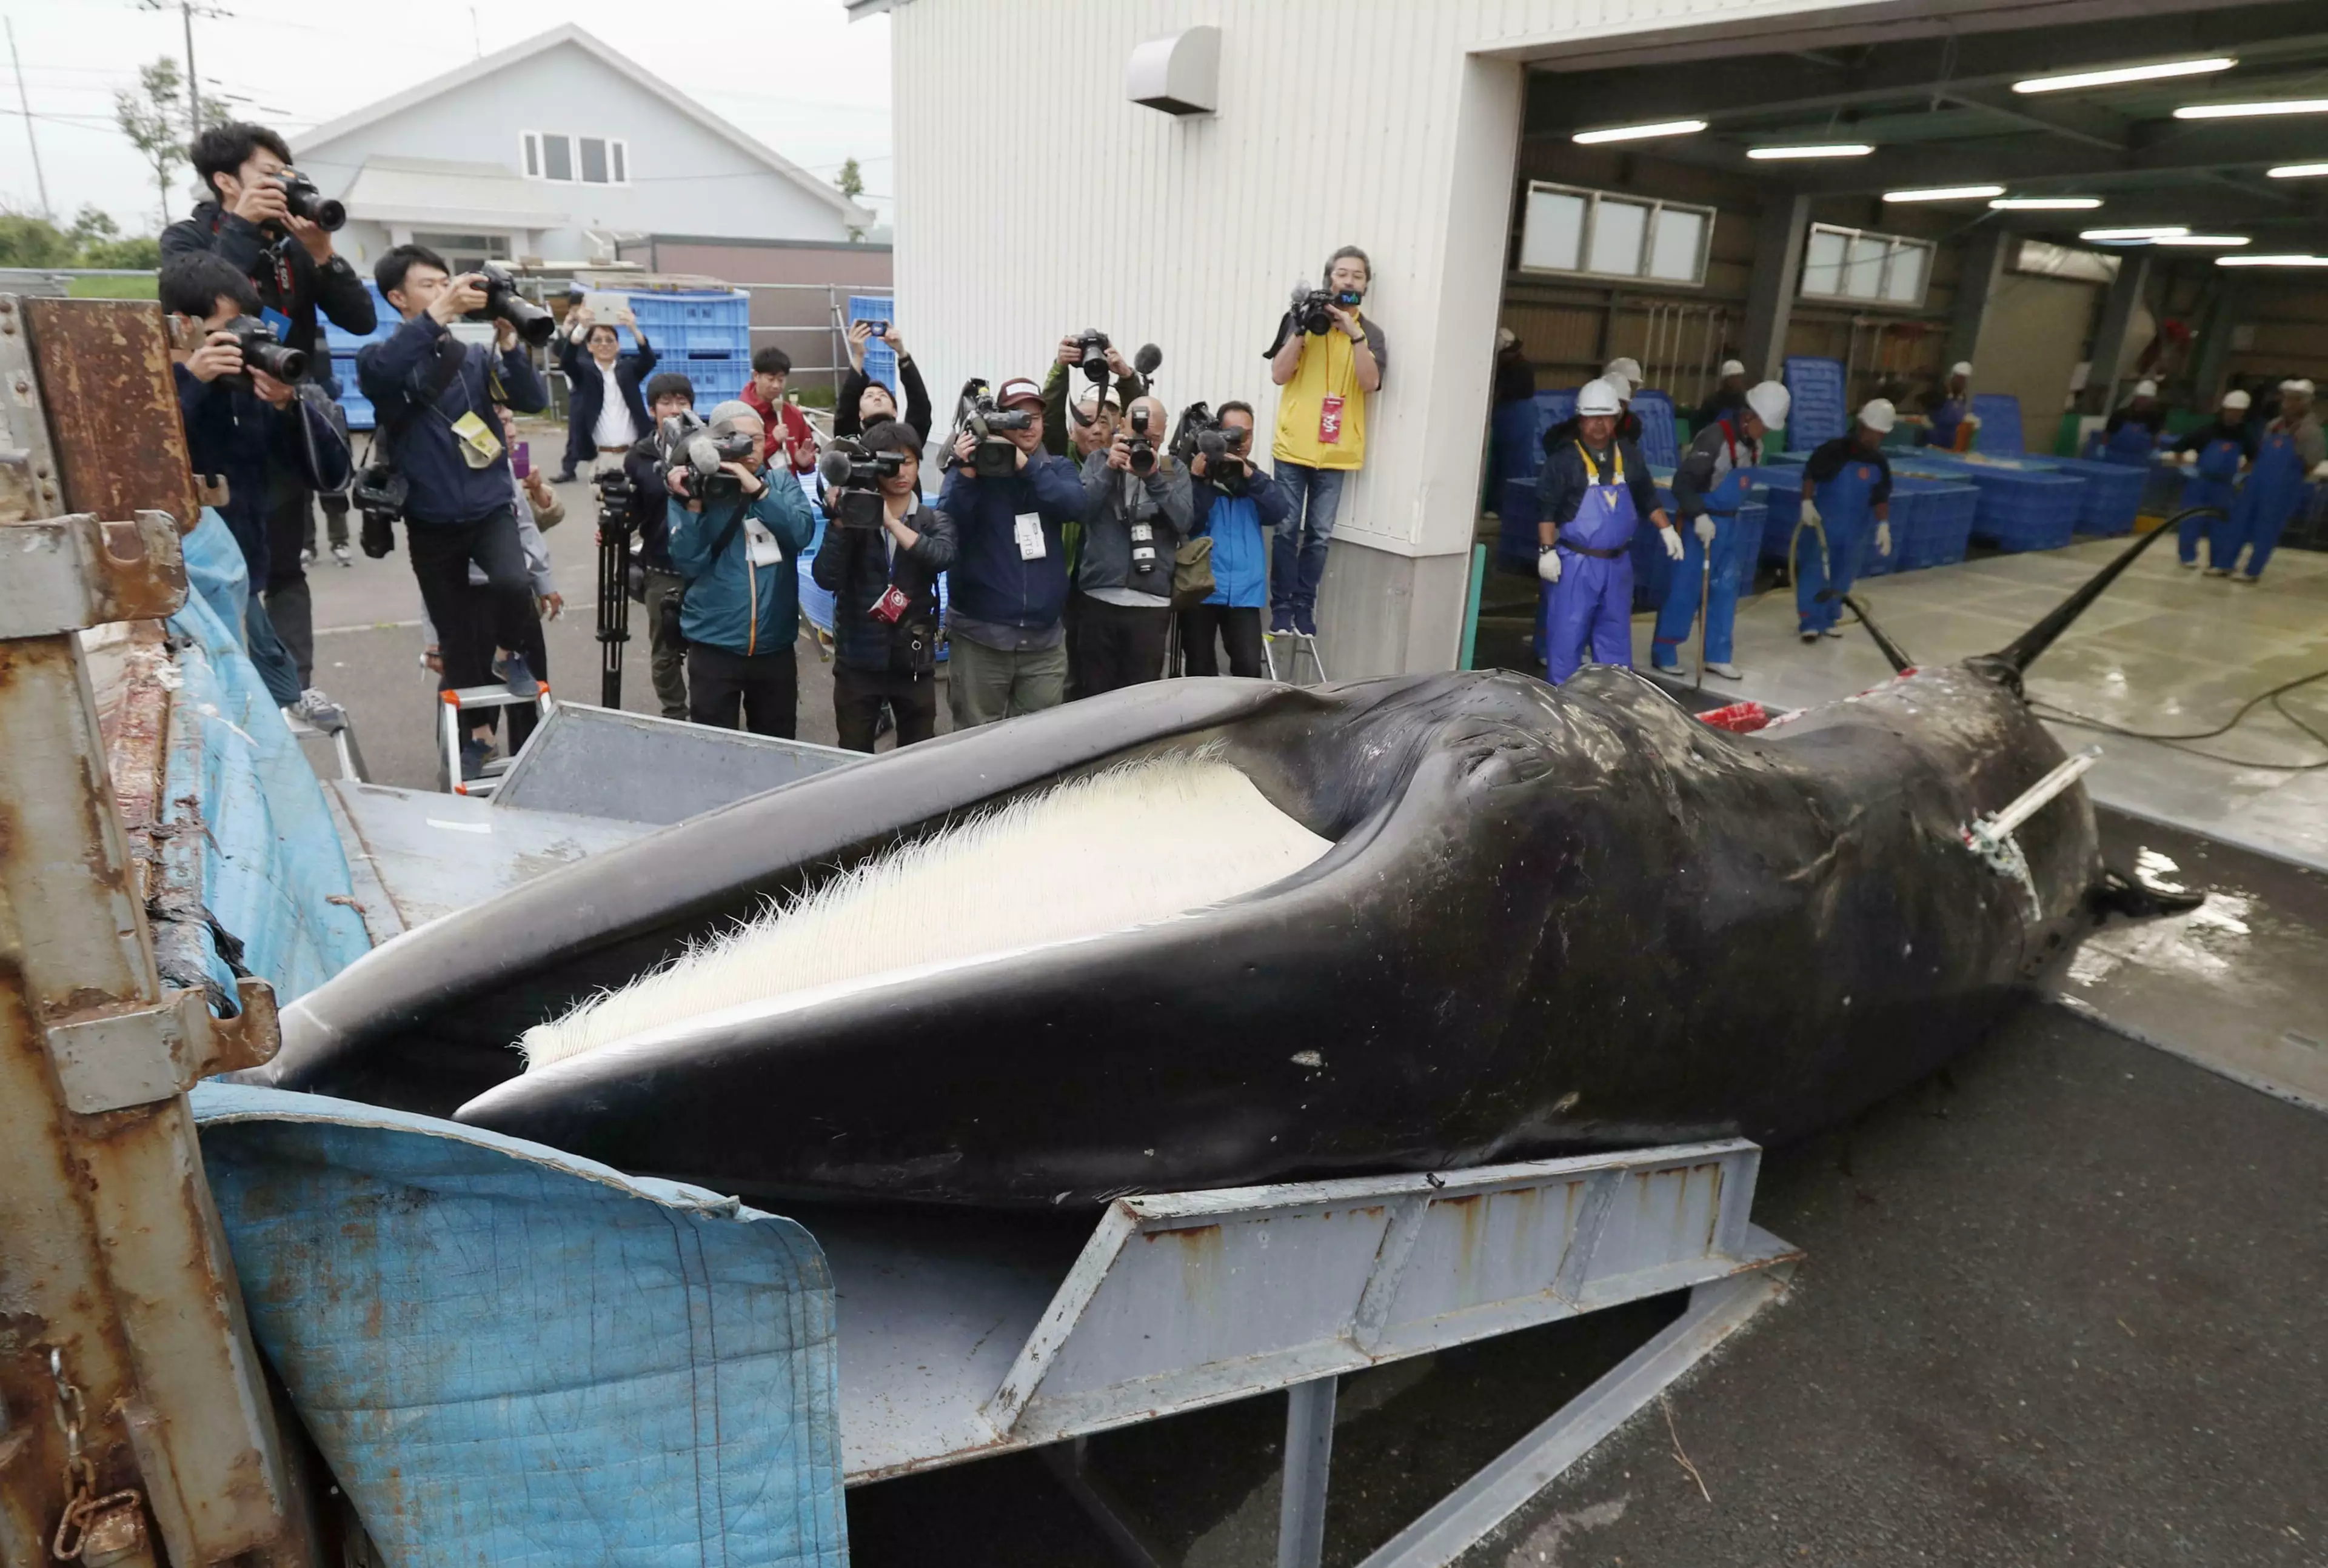 Commercial whaling has been reinstated in Japan.